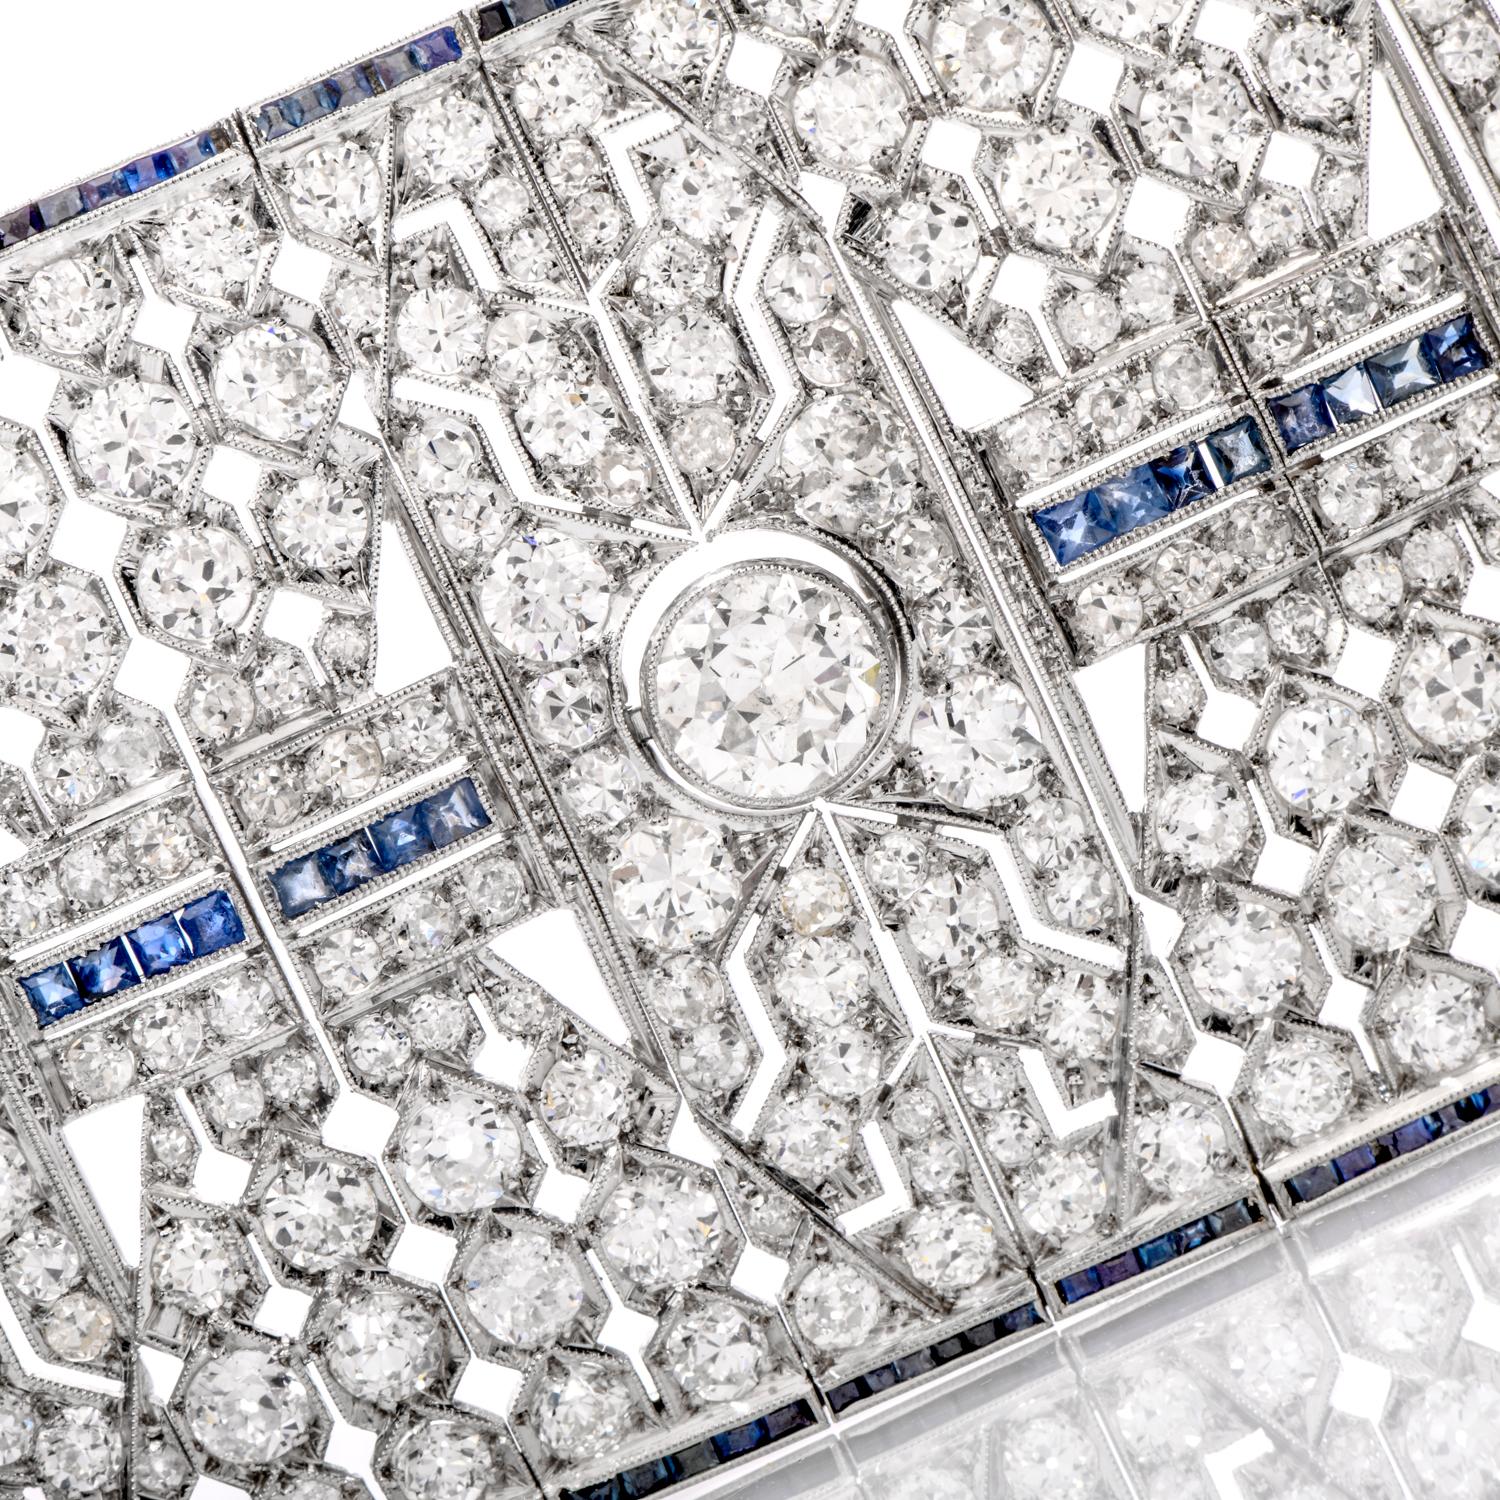 The look of a Baroness!

This stunning antique Bracelet was inspired in an Art Deco

motif and crafted in Luxurious Platinum,

Through the center and along both outter edges are French cut Sapphire

channelled into the design.

Prominently featured